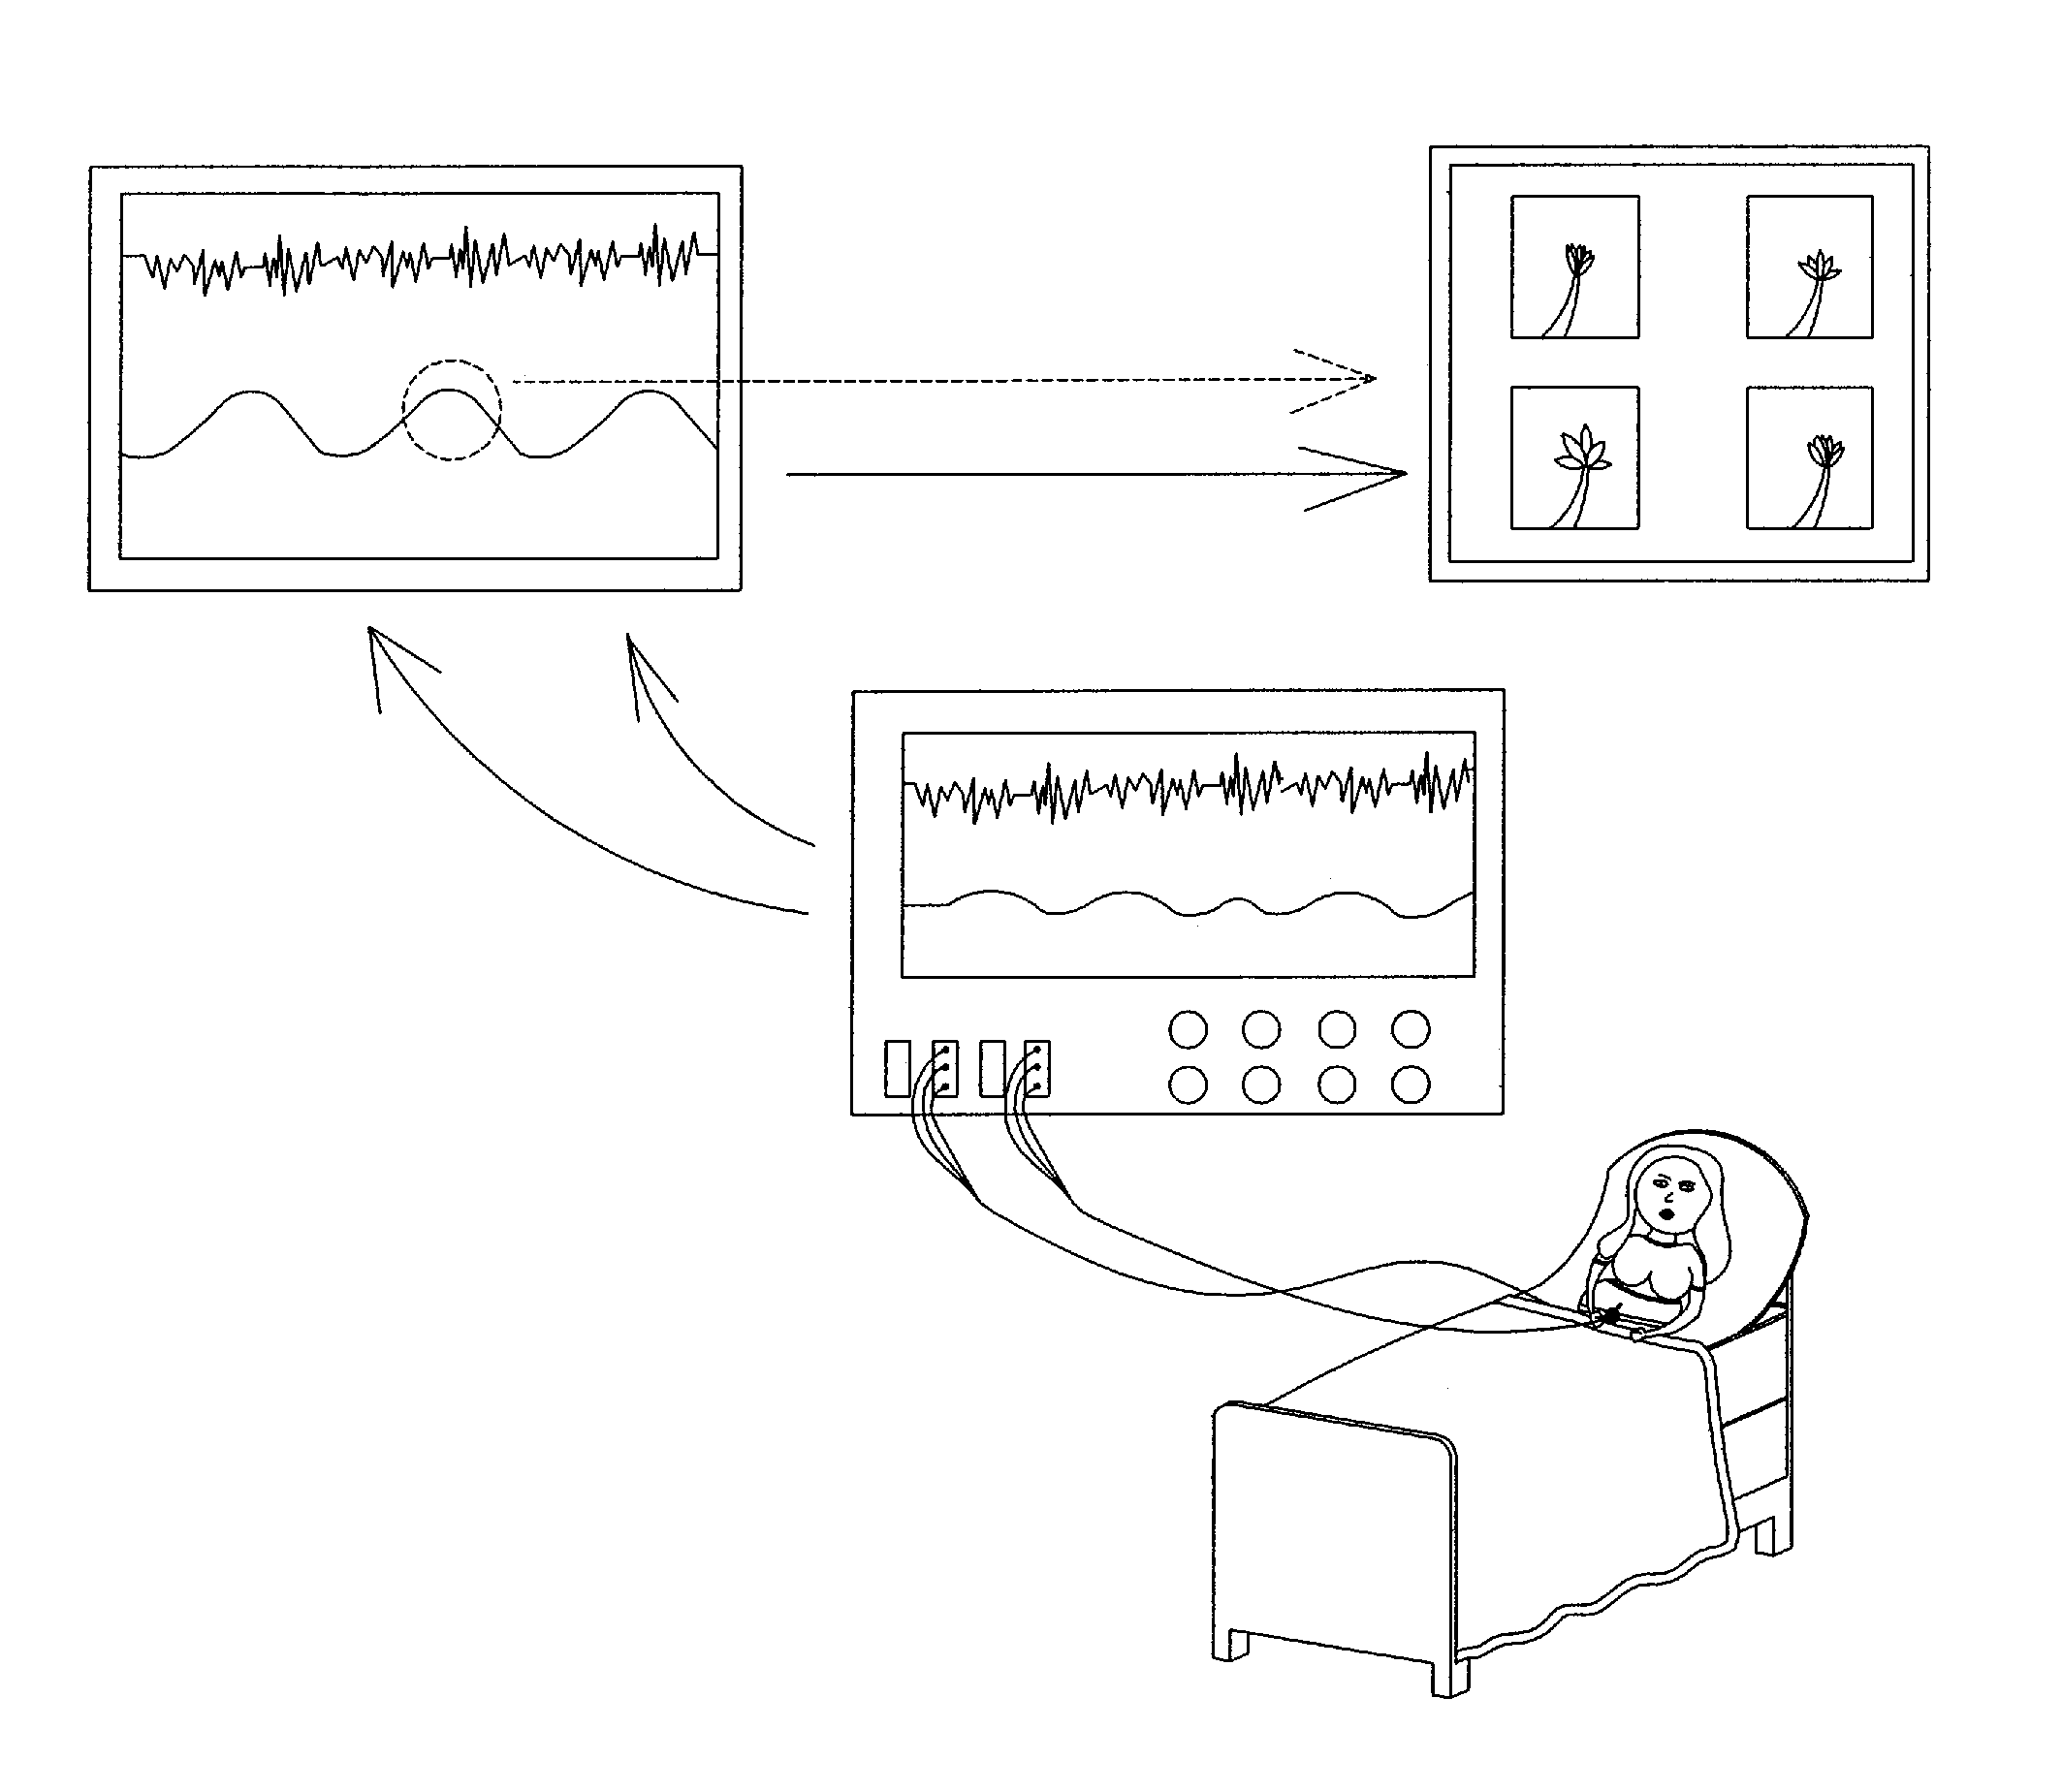 Method and apparatus providing timed visual images during childbirth